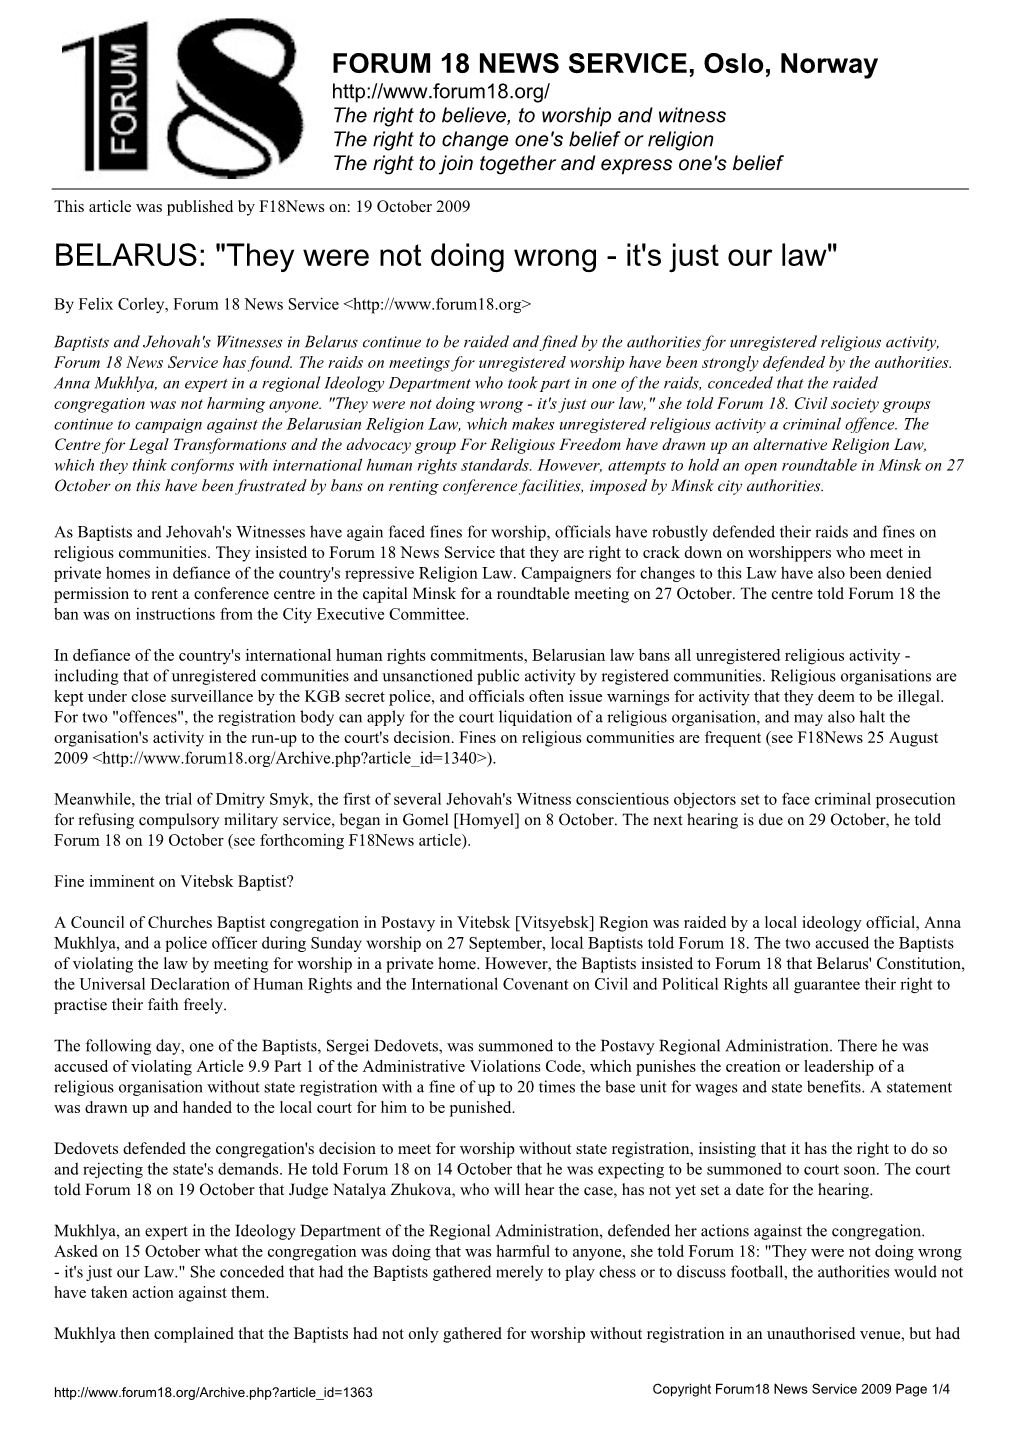 BELARUS: "They Were Not Doing Wrong - It's Just Our Law"